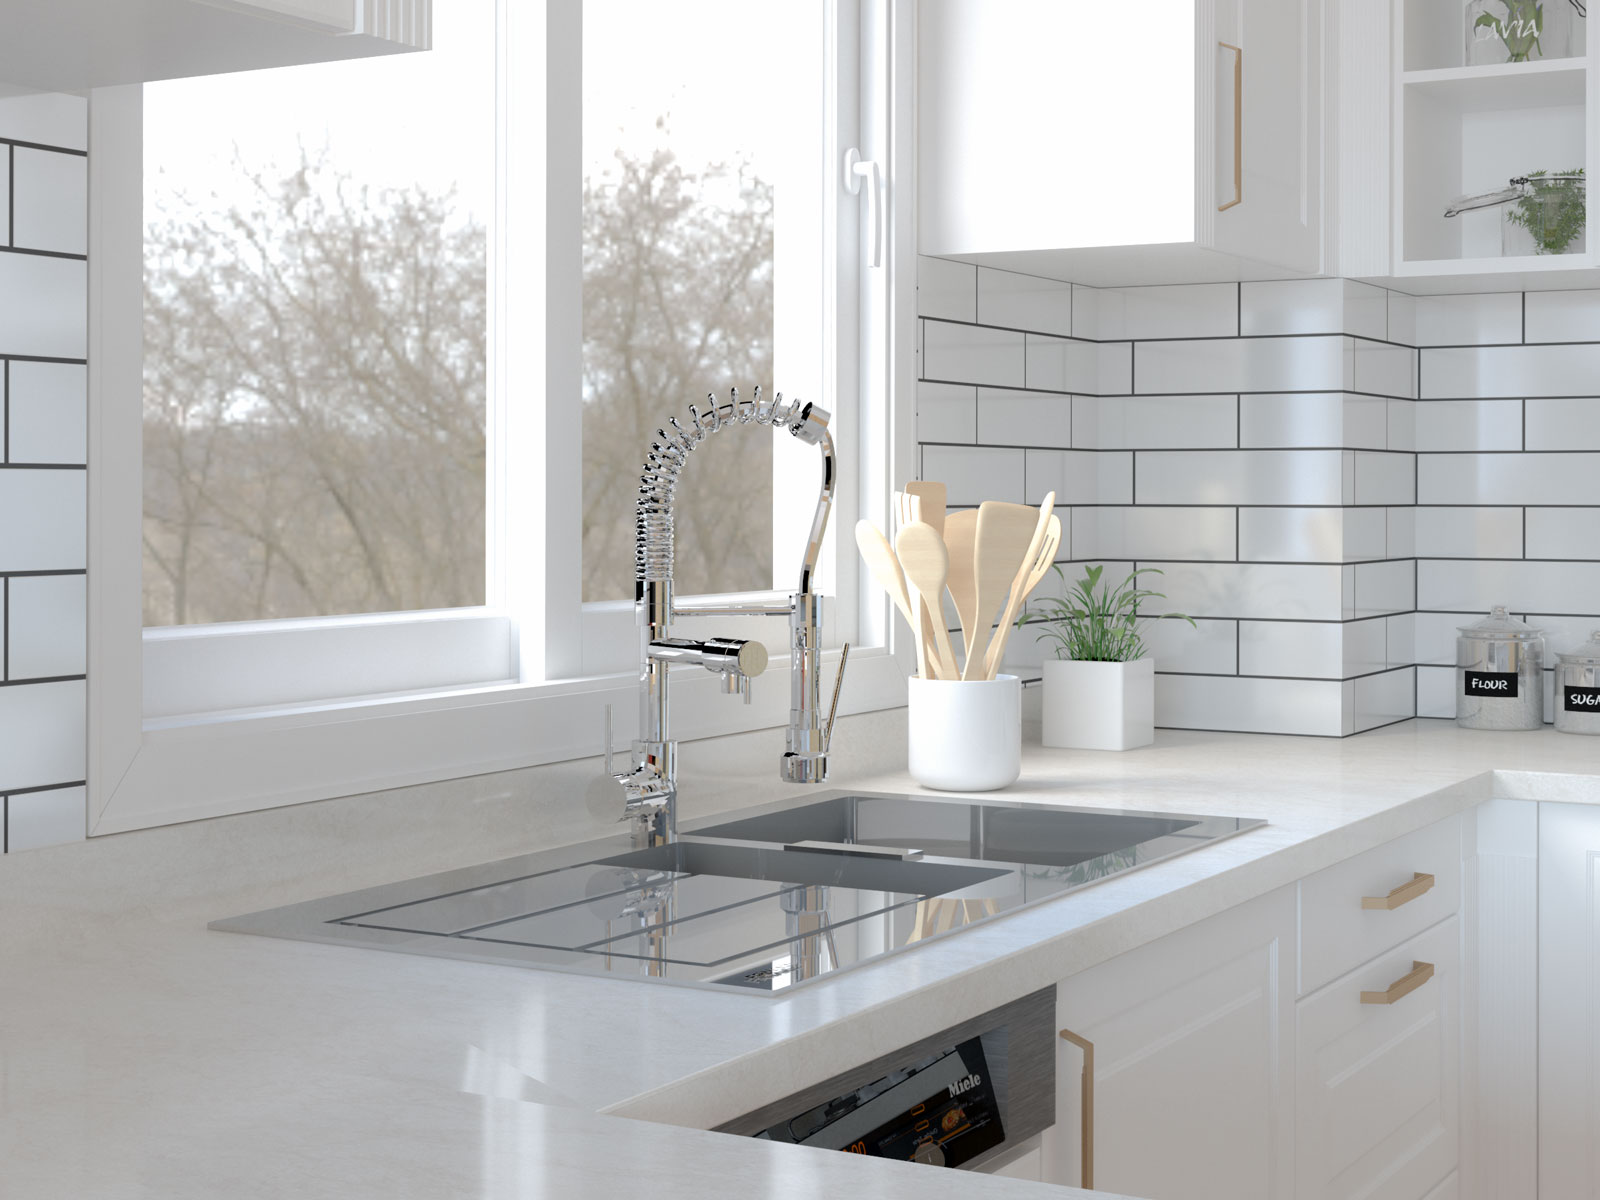 What Sink Color Goes With White Countertops